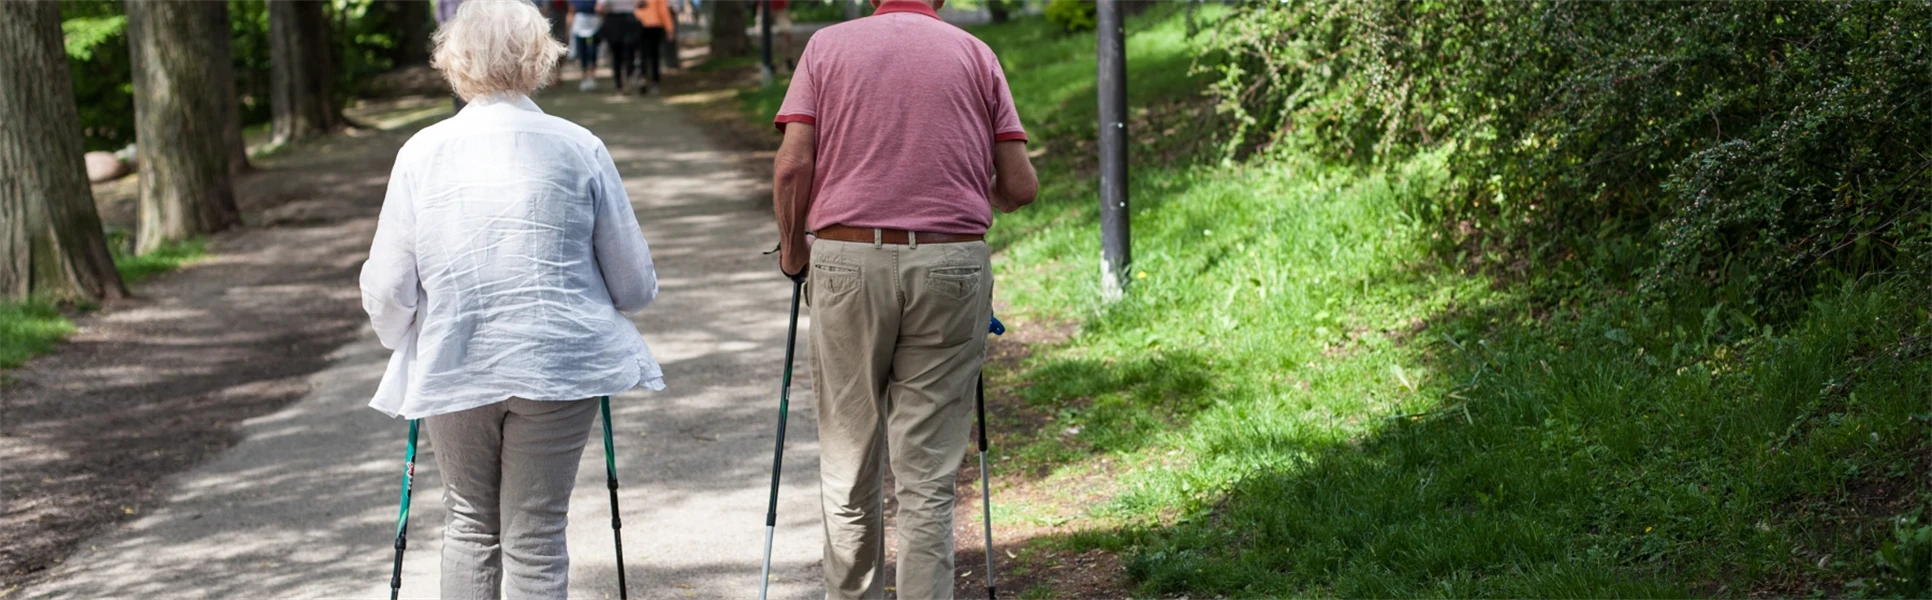 Elderly couple go Nordic walking in a park setting.